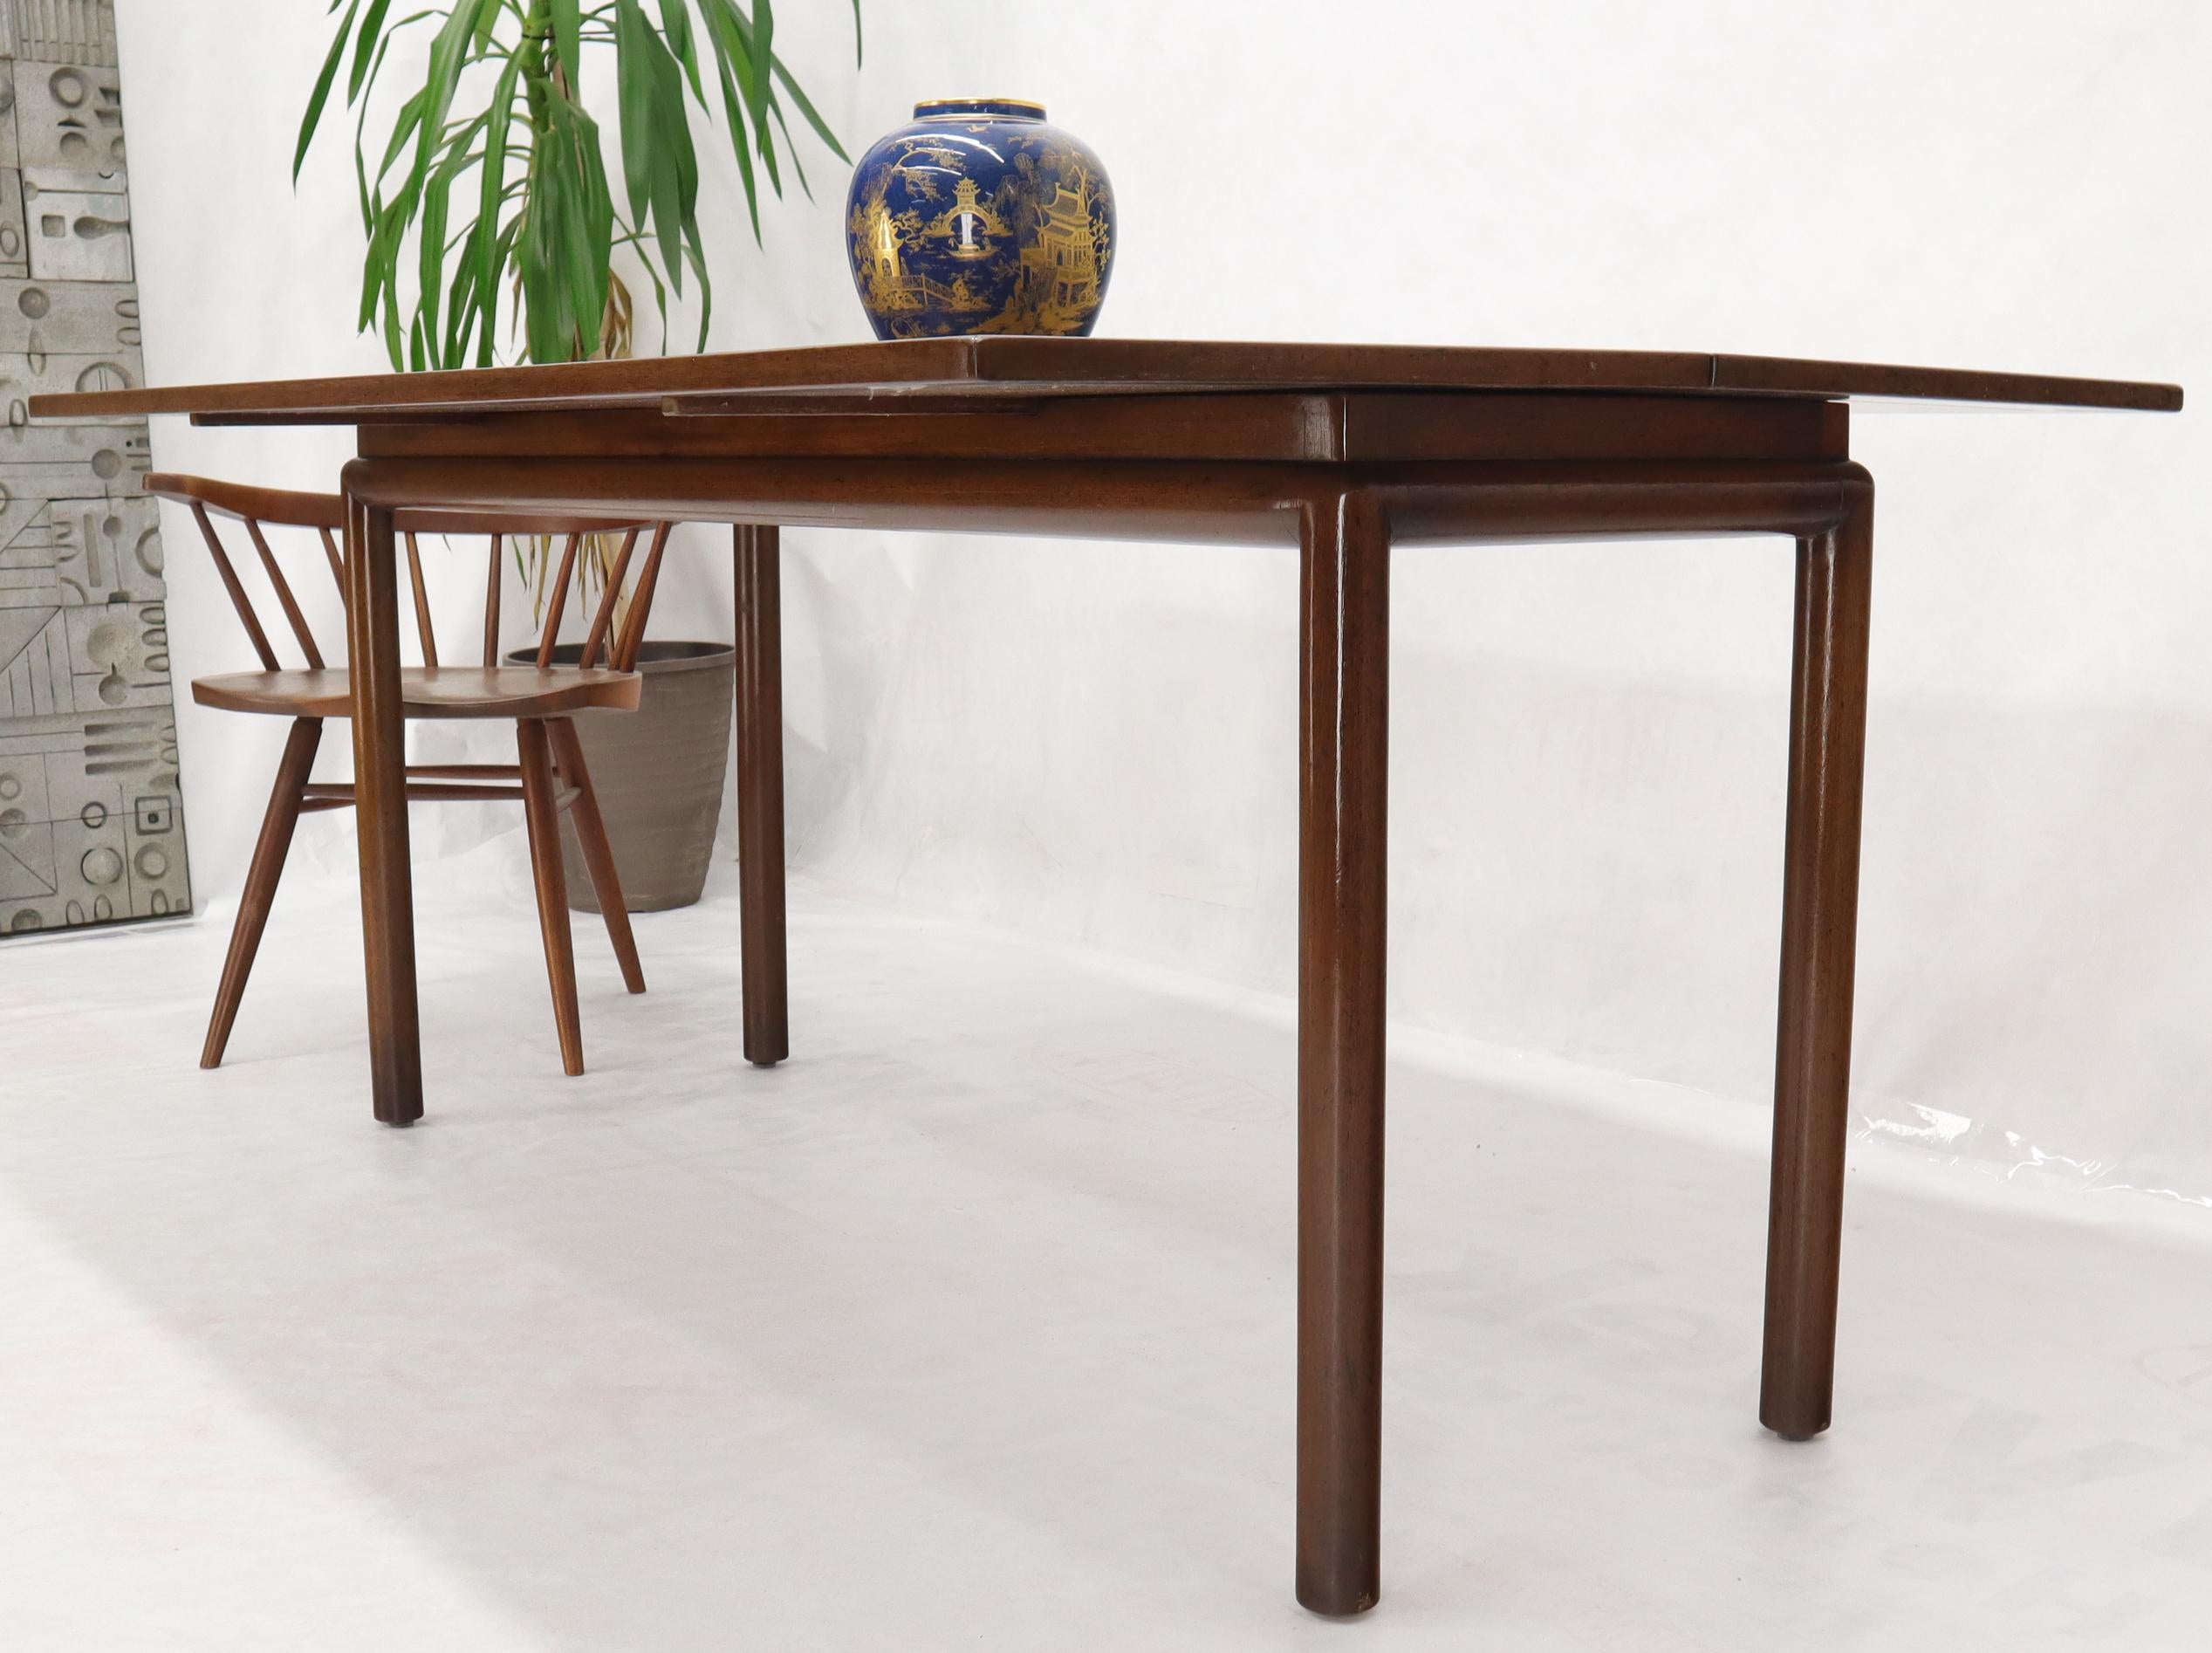 American Midcentury Walnut Flip Top Console Dining Table on Cylinder Legs